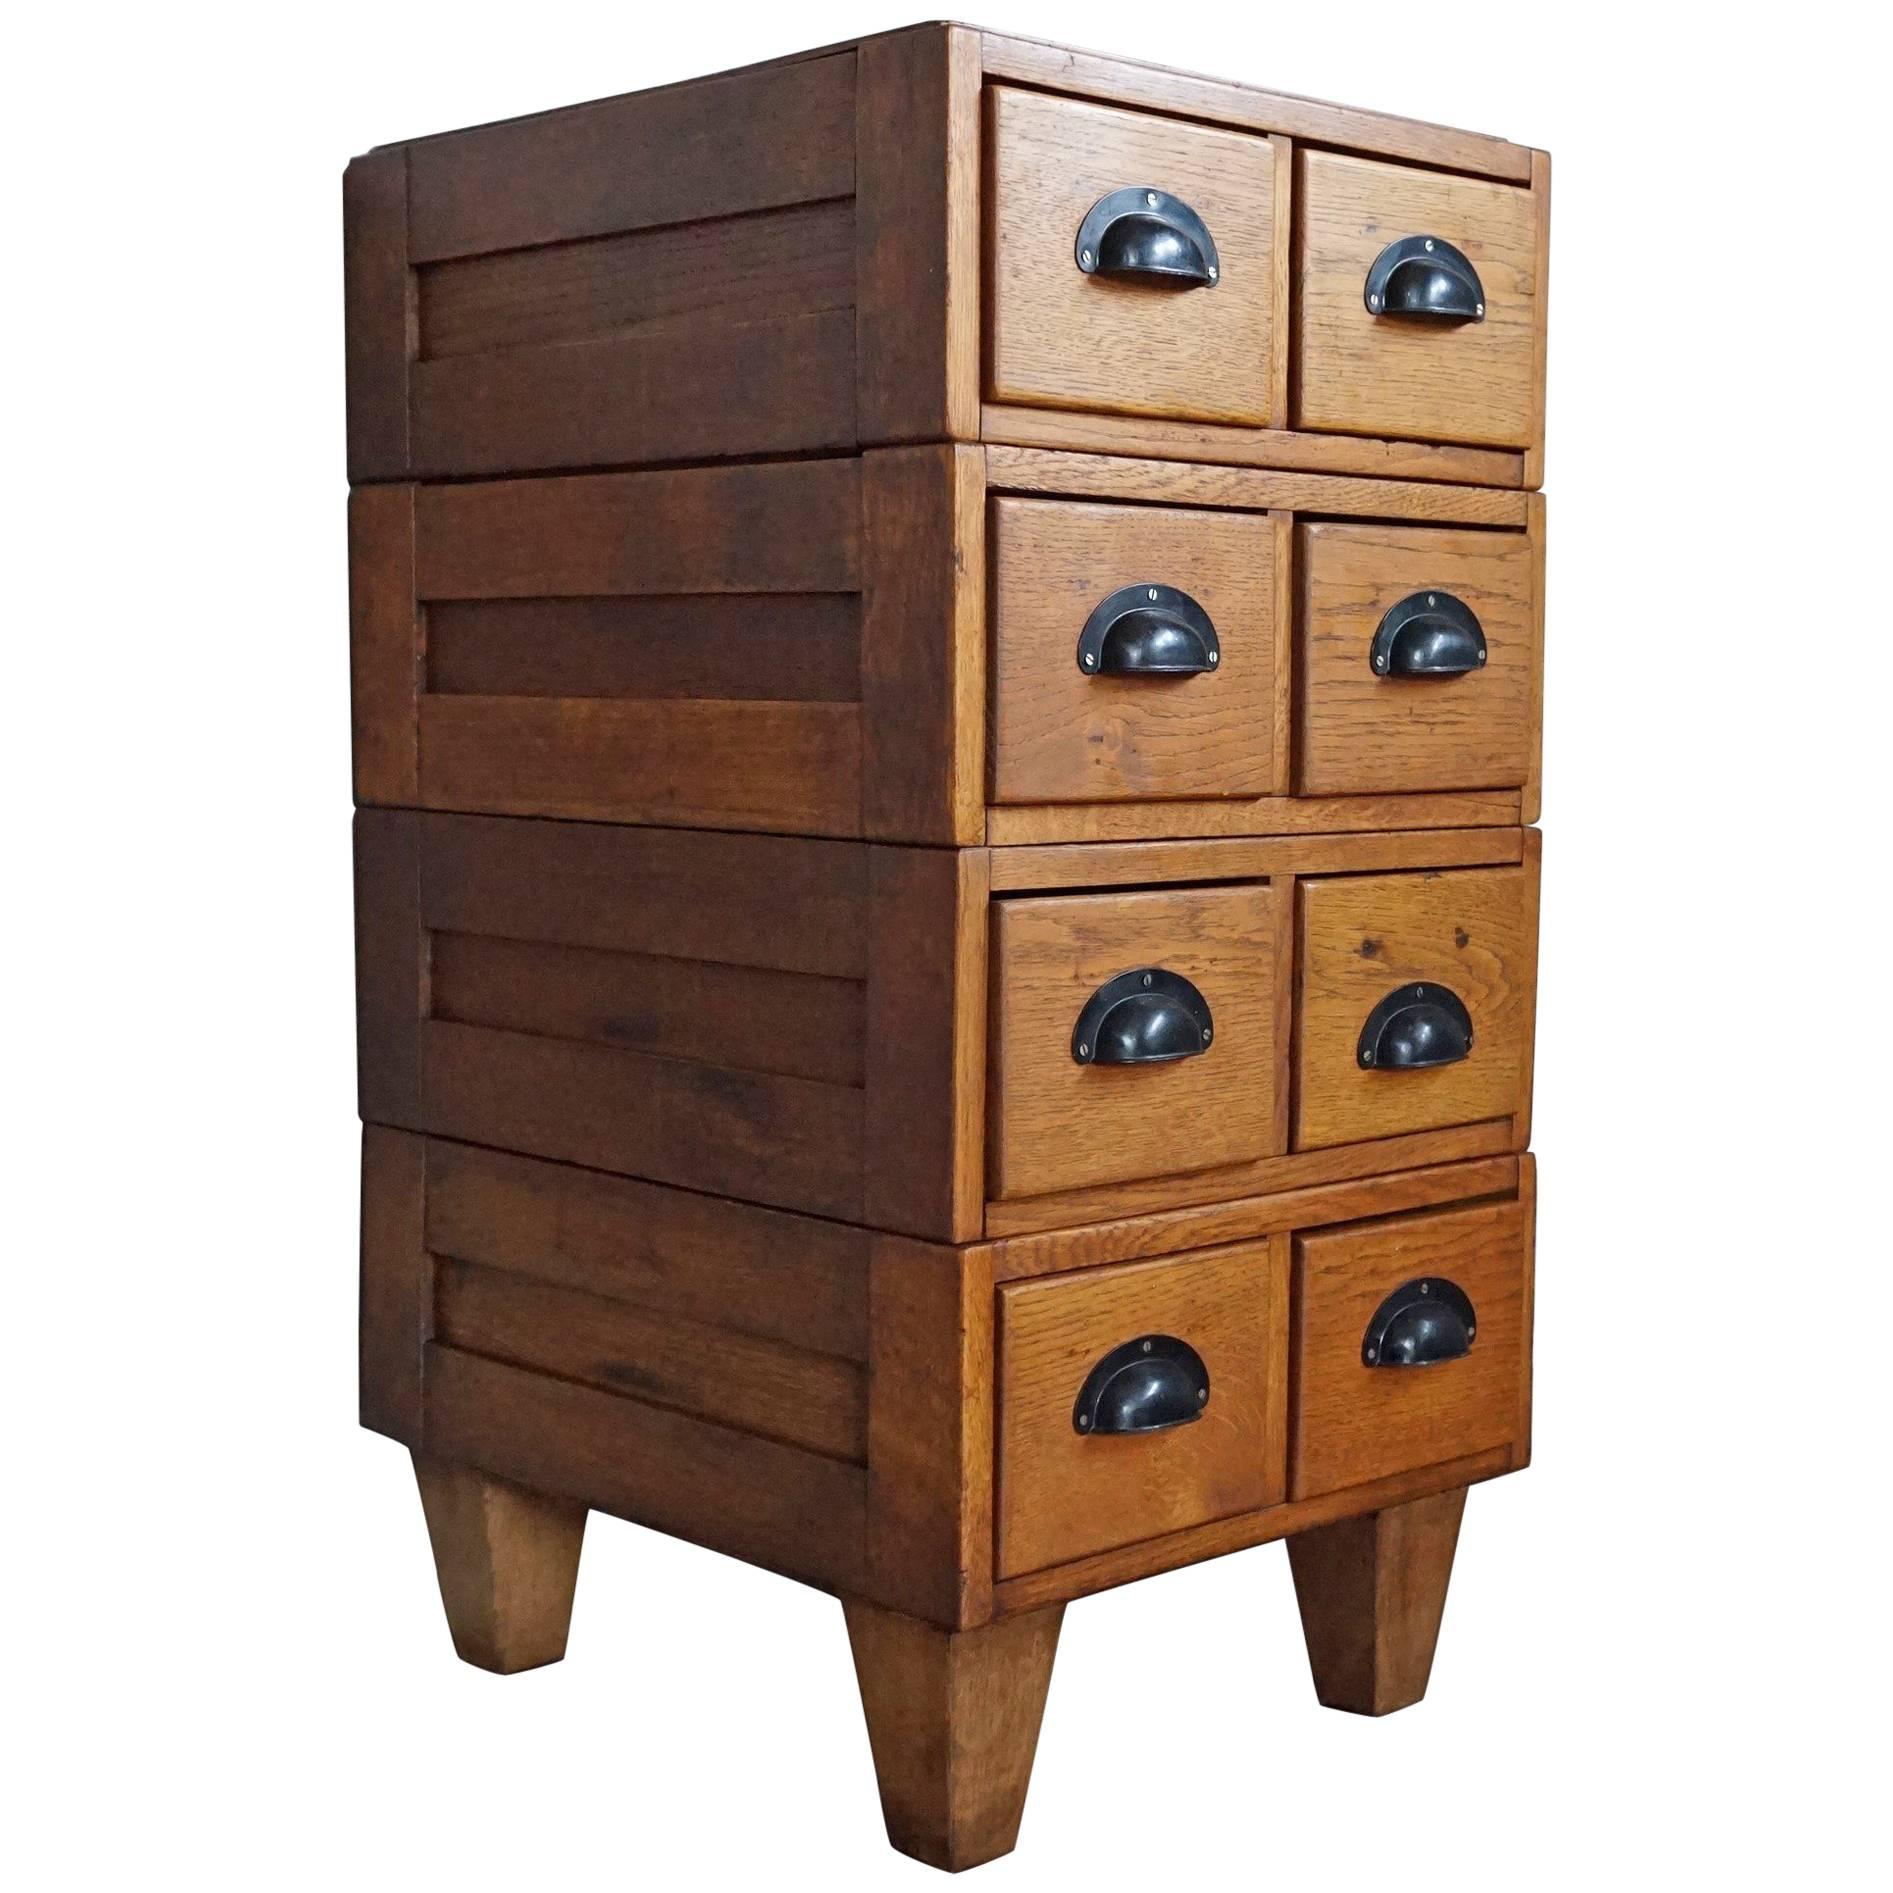 Early 20h Century Small Chest of Drawers / Art Deco Era Oak Filing Cabinet